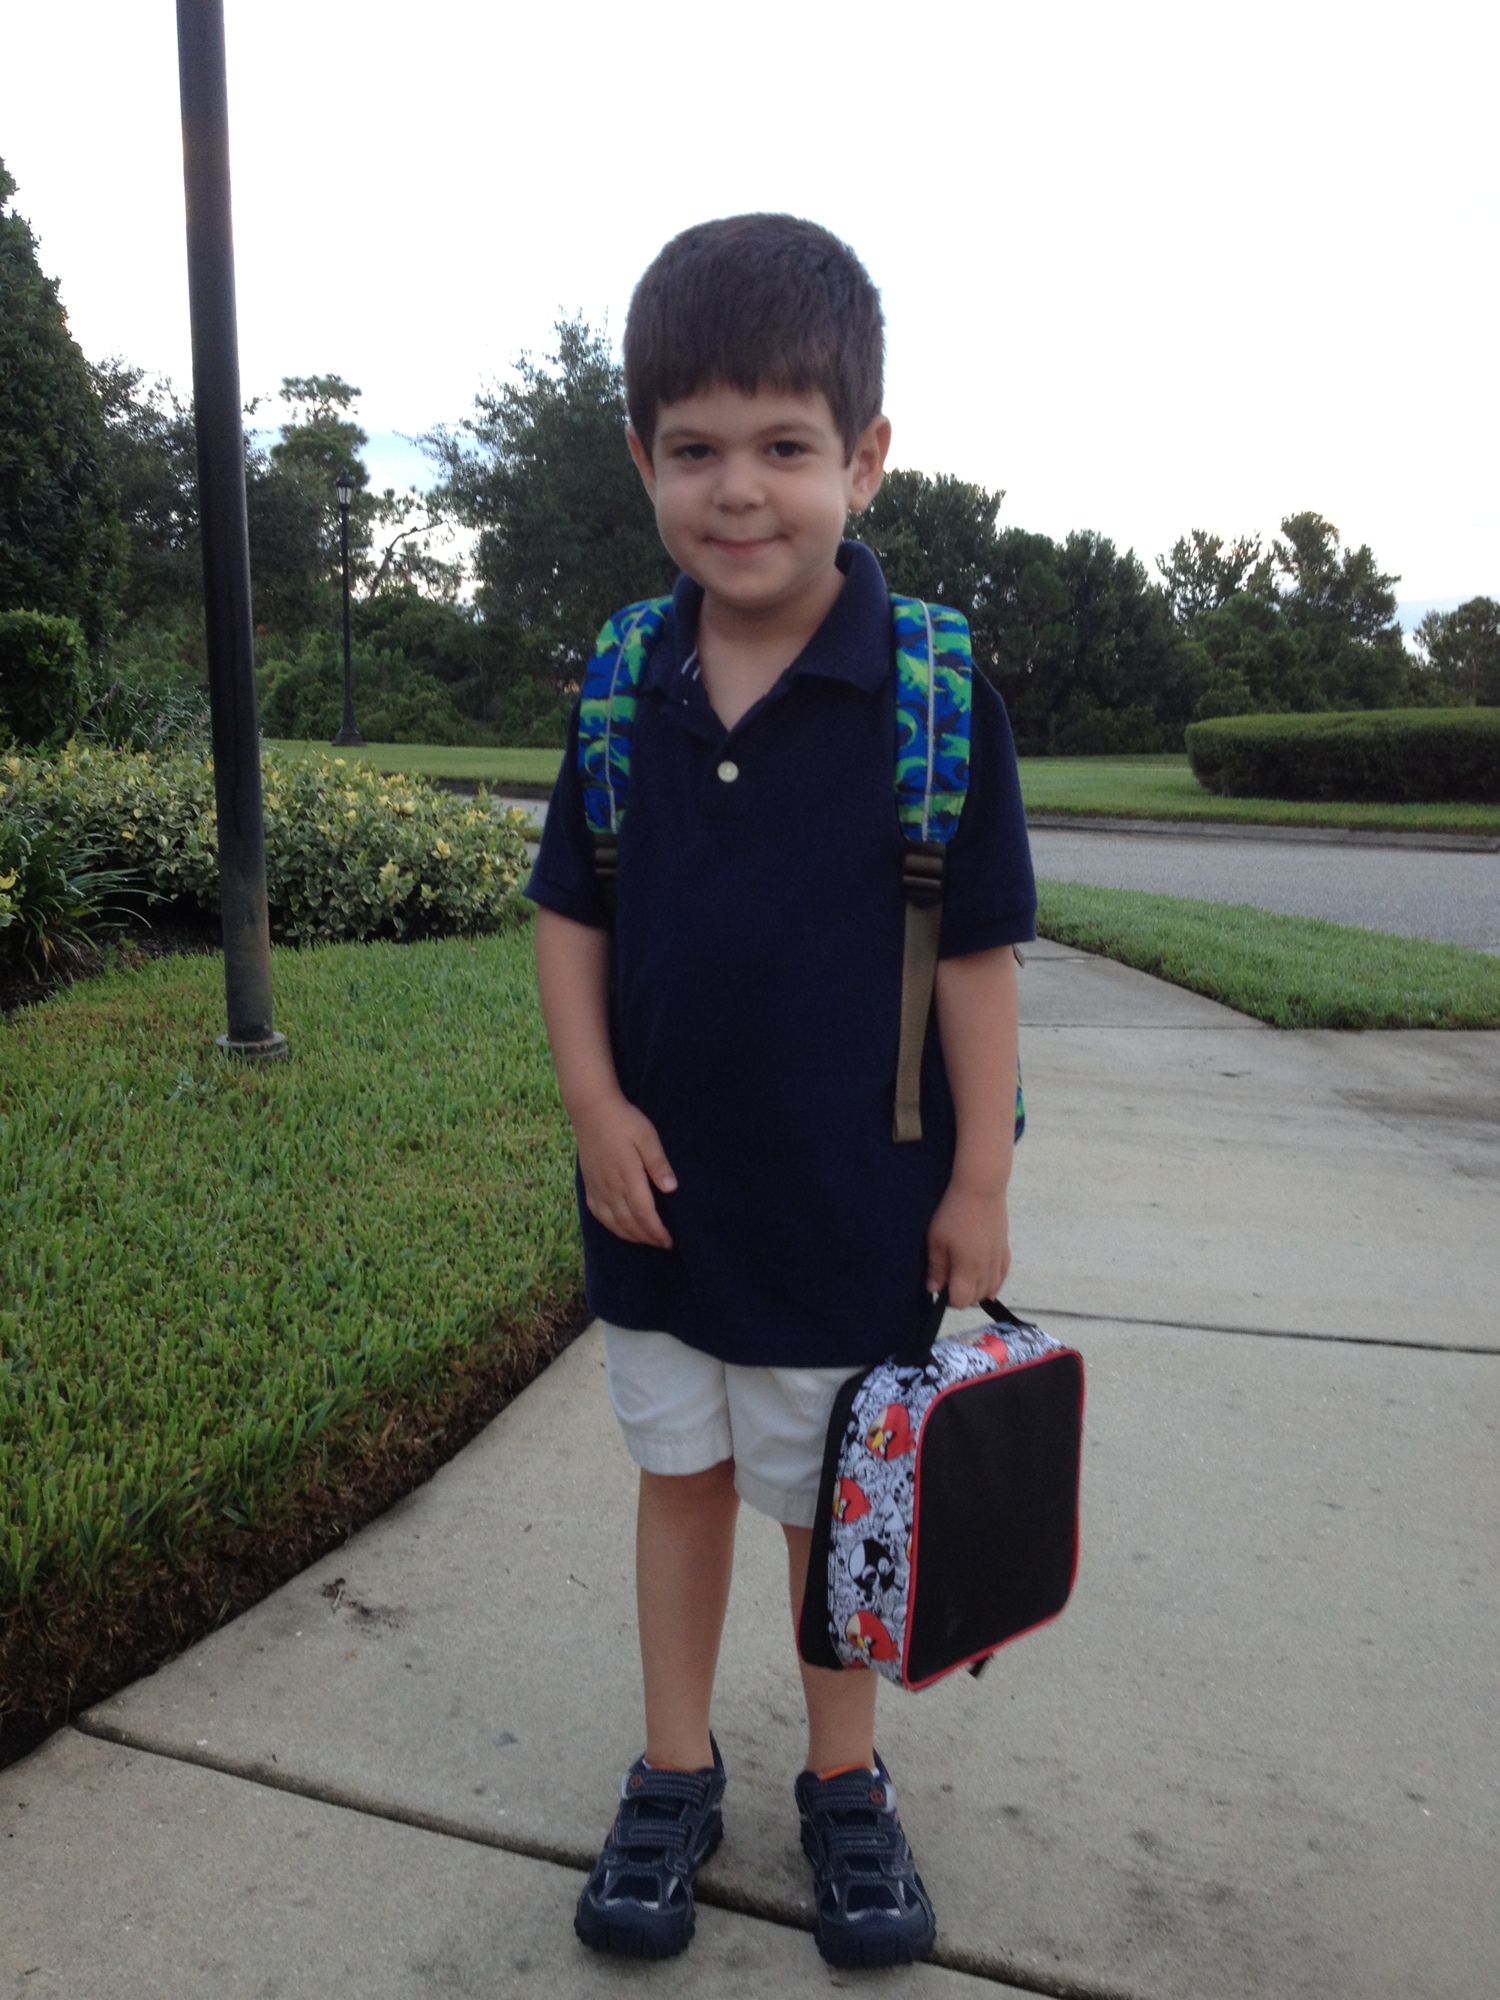 Aaron before his first bus ride to school in August 2013.